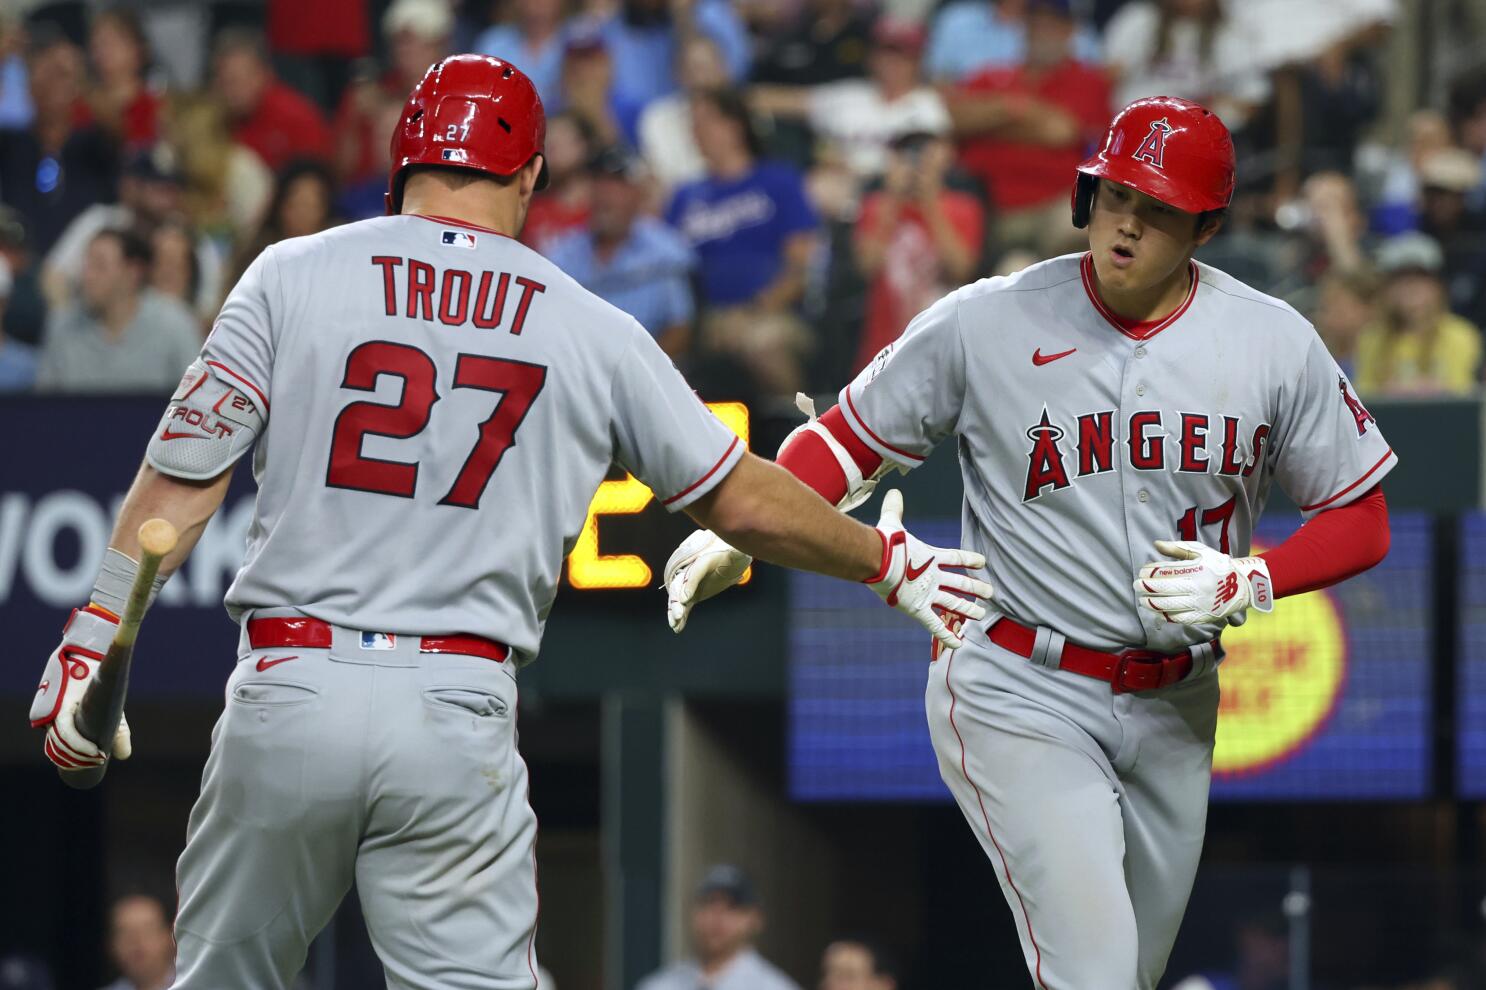 Perry Minasian: Anthony Rendon Crucial To Angels' Success - Angels Nation